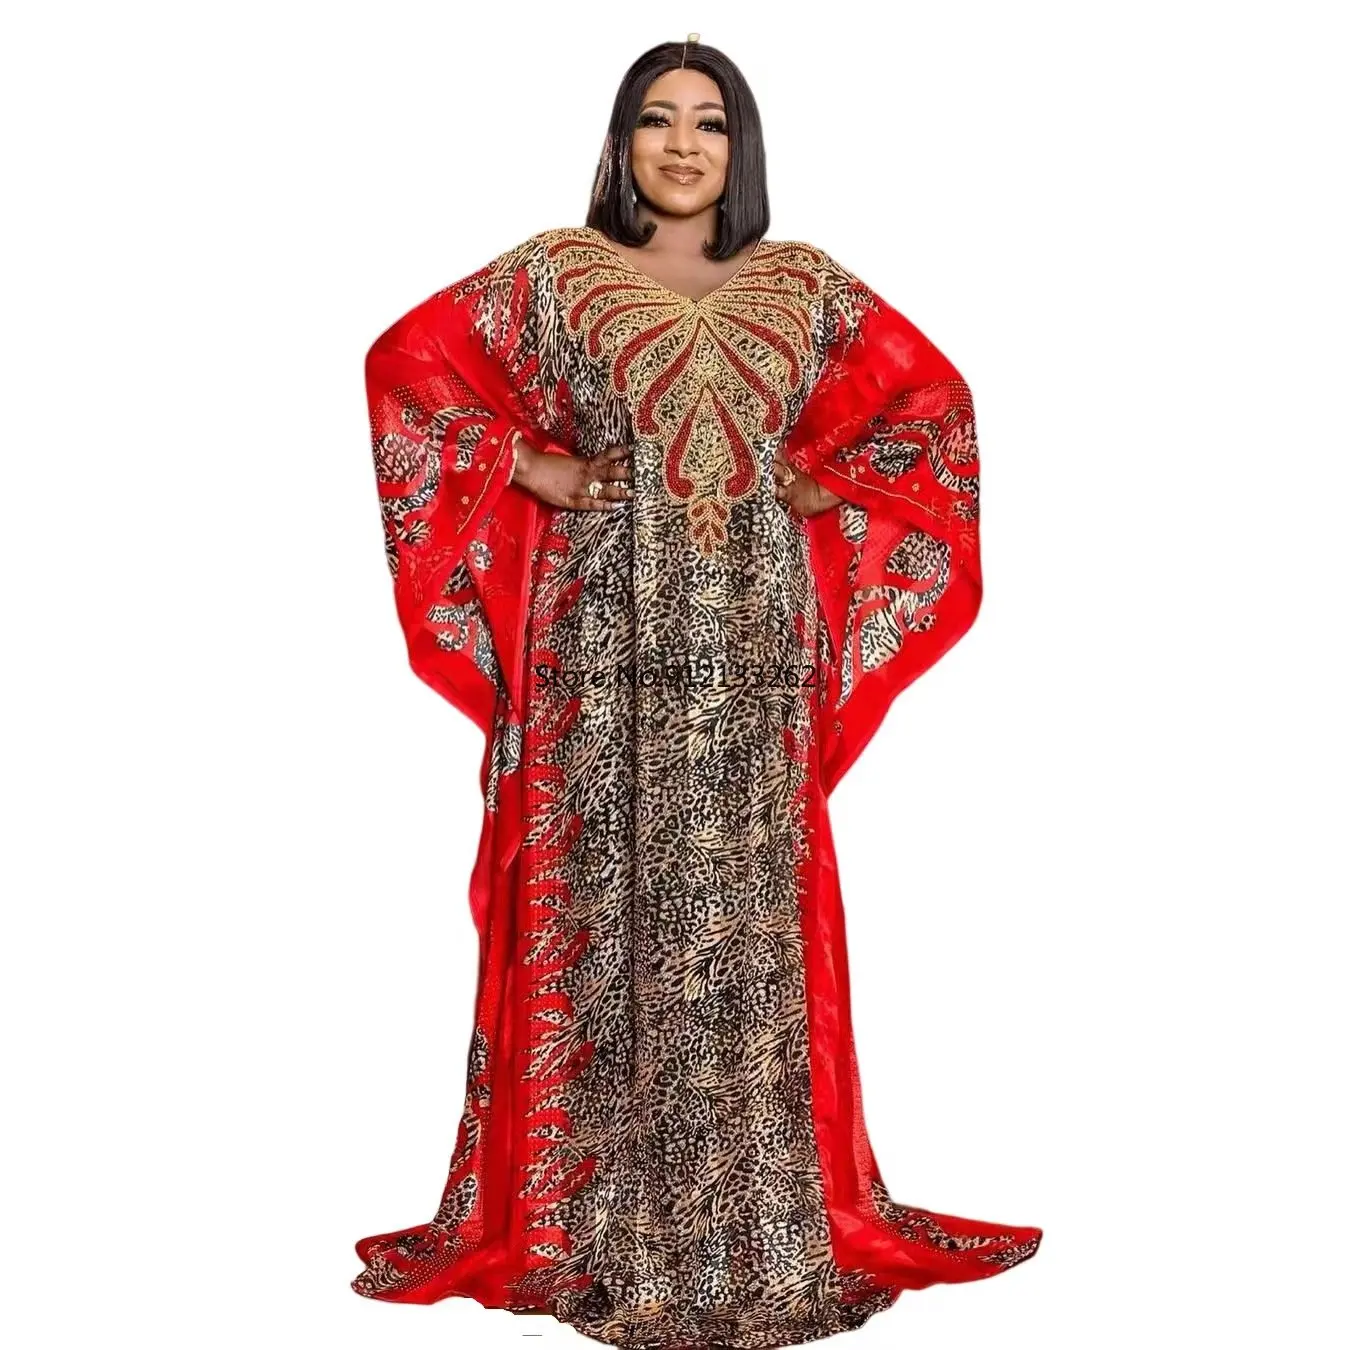 

African mom fashionable chiffon printed dress long robe large swing luxury diamond decoration with inner stretch inner skirt